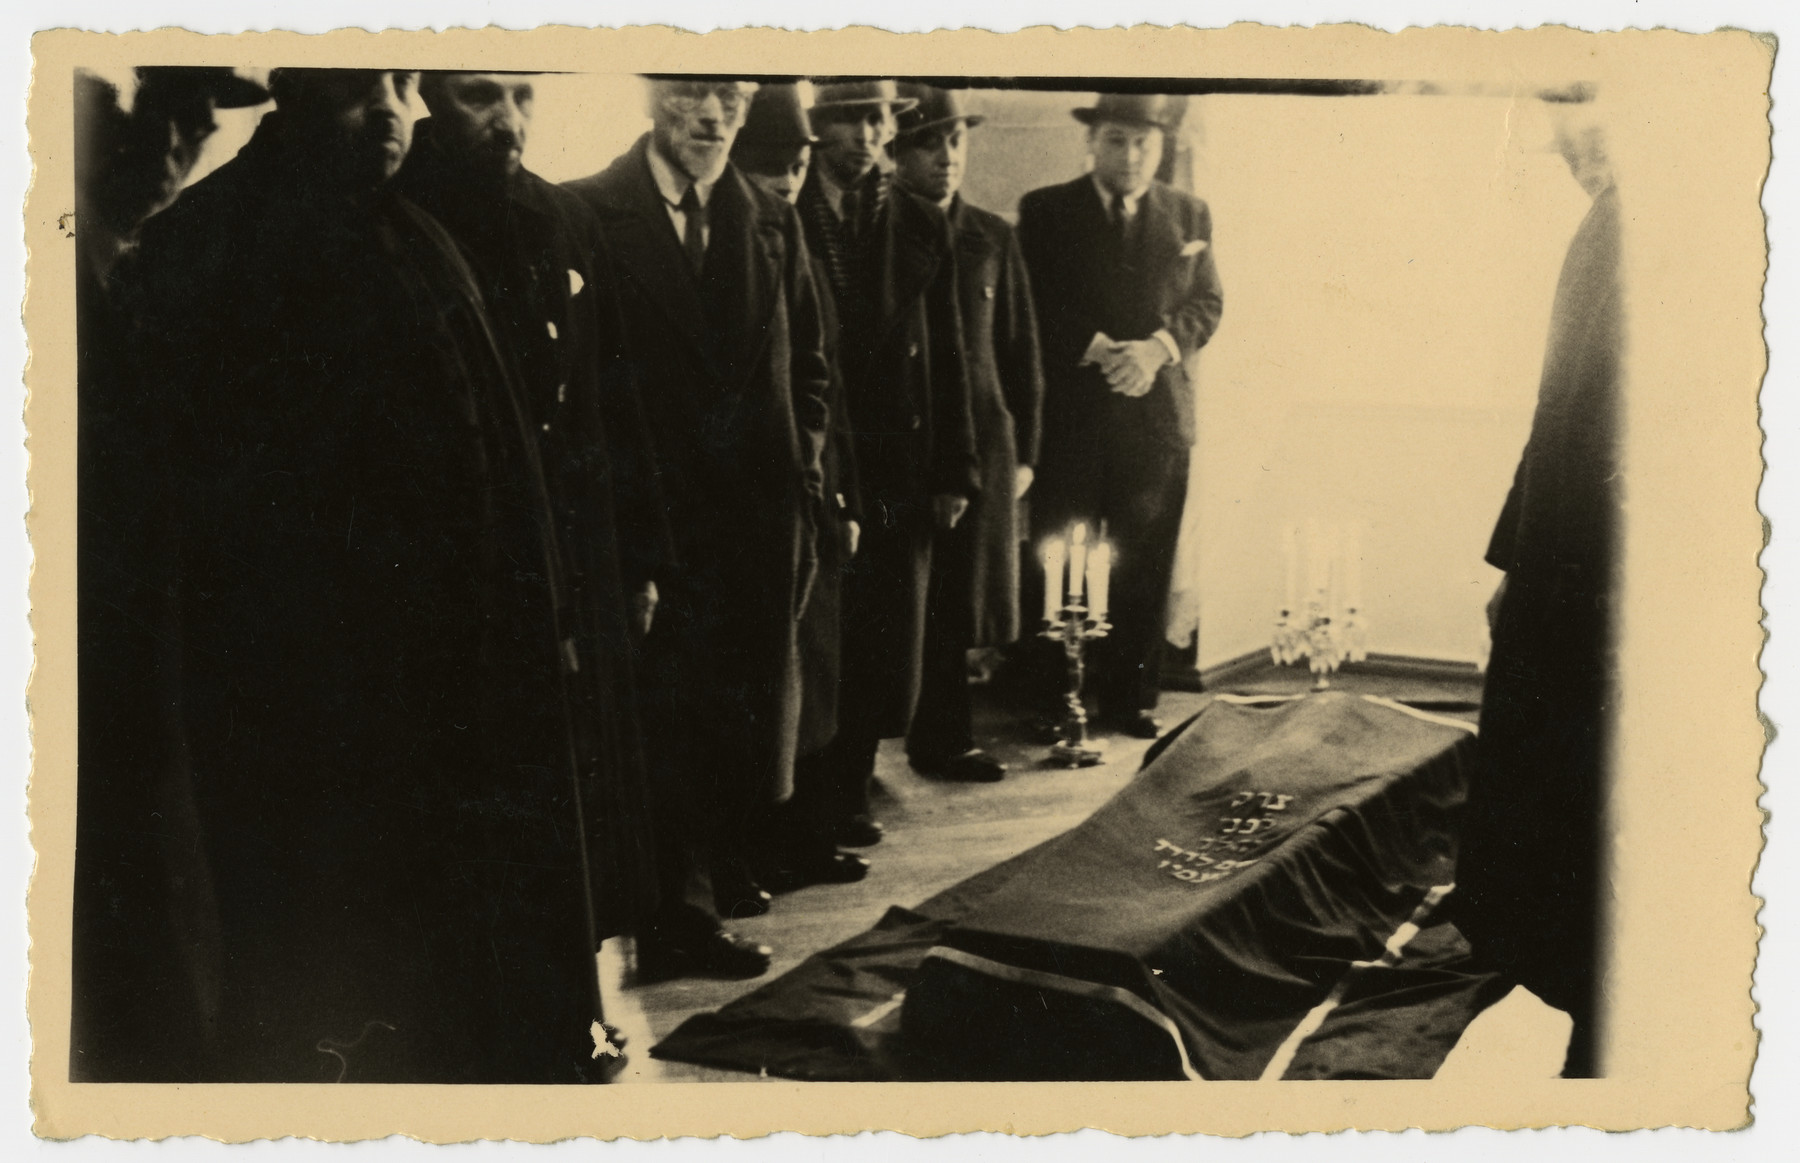 The body of Freida Albin lies in state prior to the funeral.

A group of men stands in attendance.